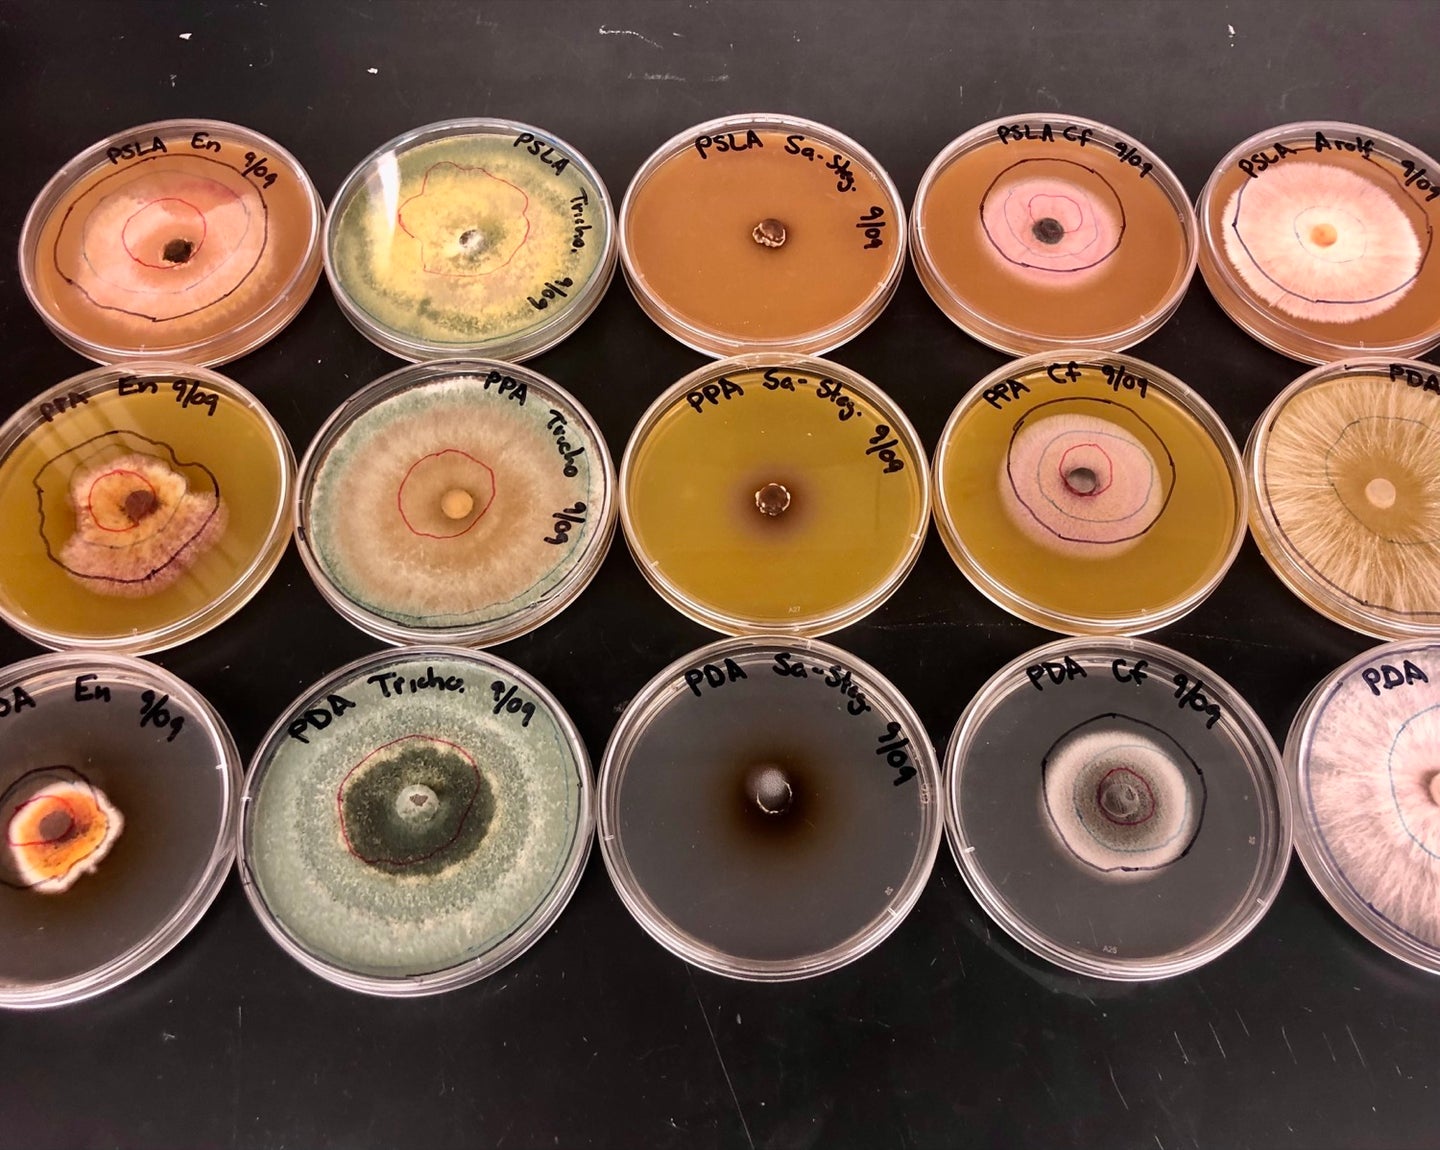 three rows of agar plates of various orange hues that are covered in different types of mold or fungui